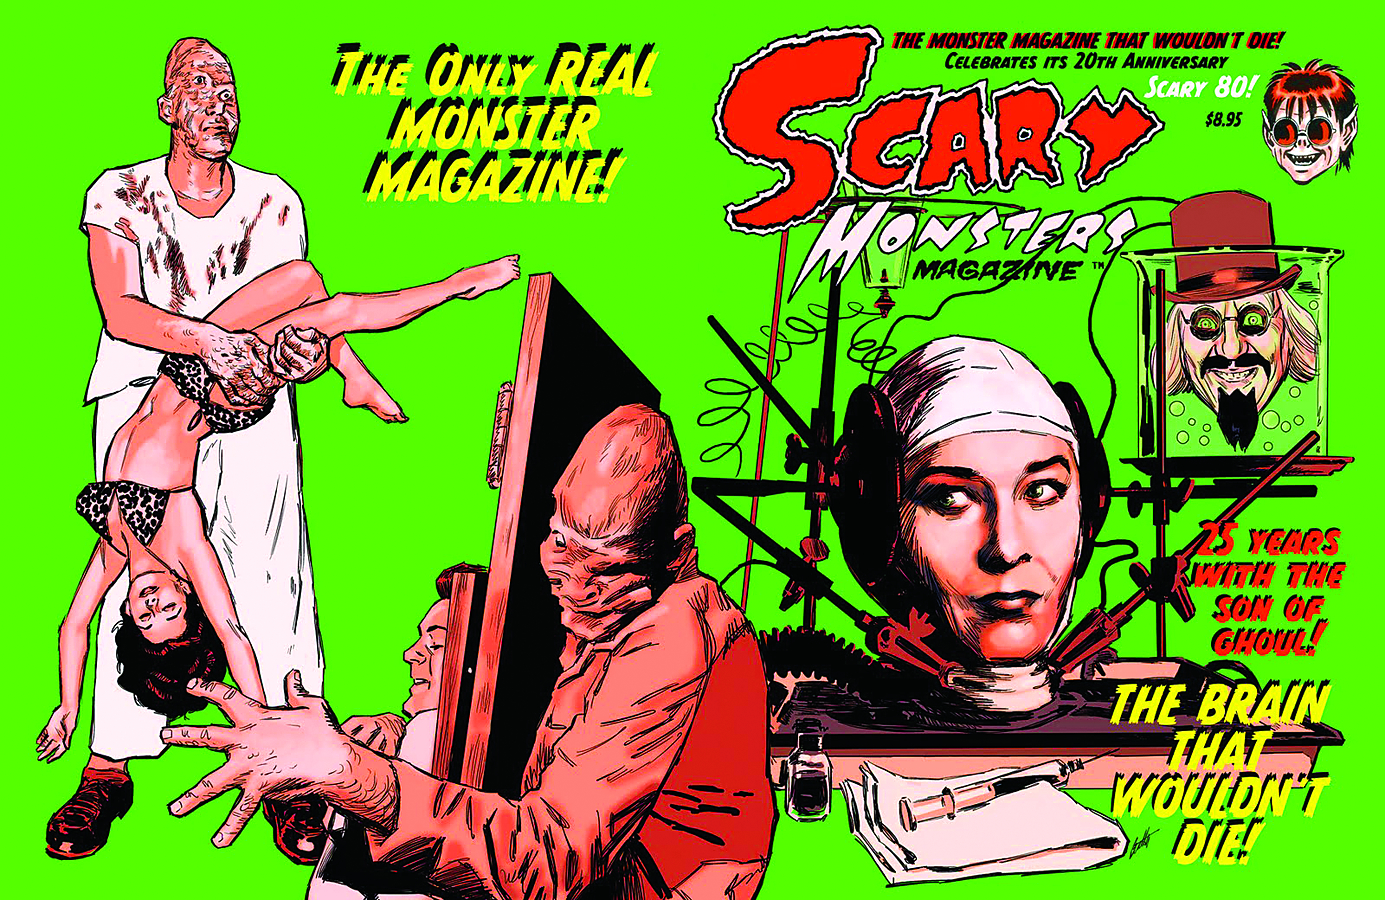 SCARY MONSTERS MAGAZINE #81